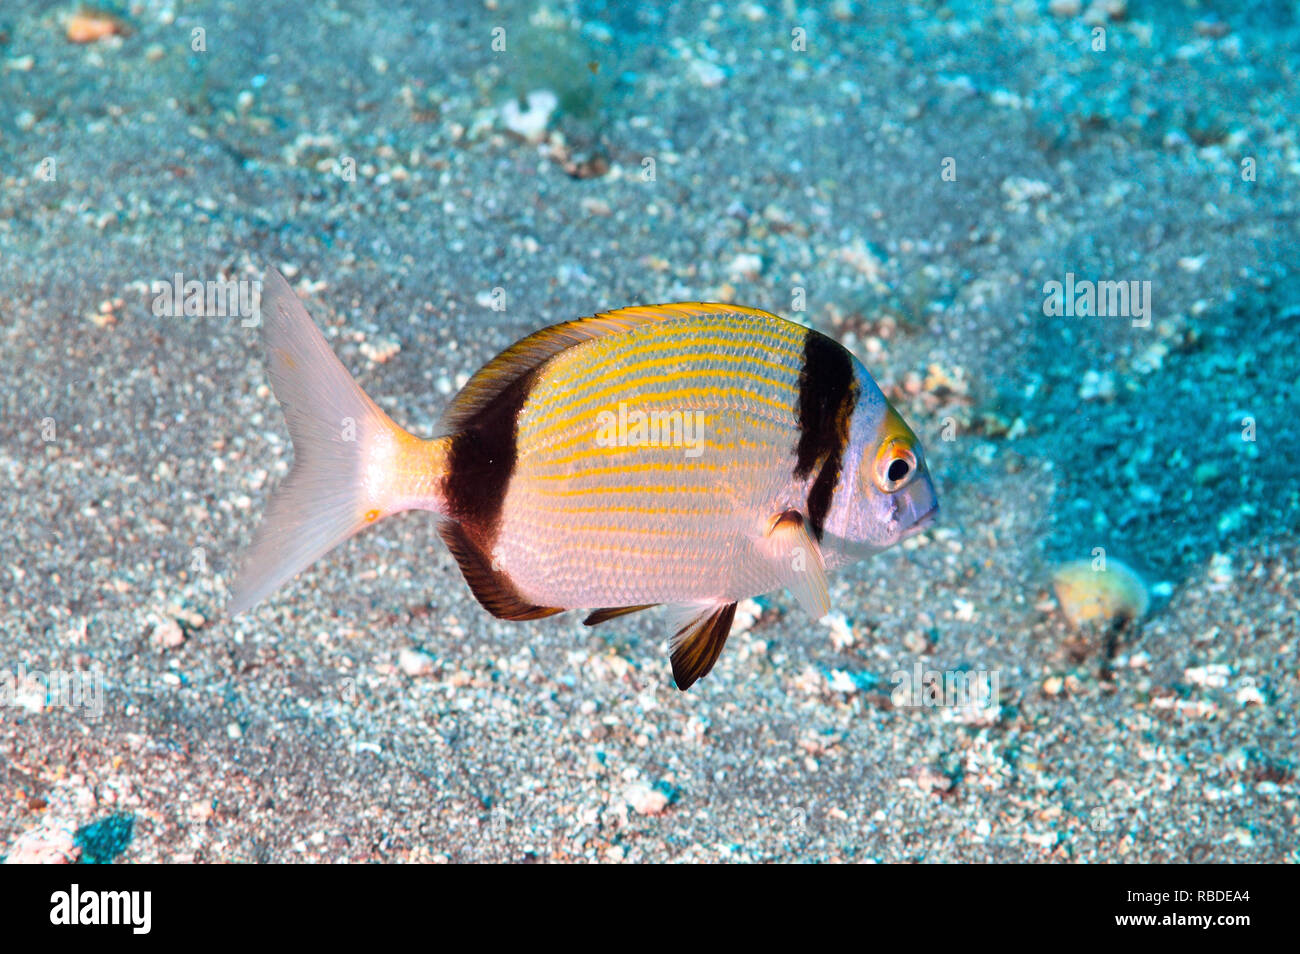 Two-Banded Sea Bream in Tenerife - Canary Islands Stock Photo